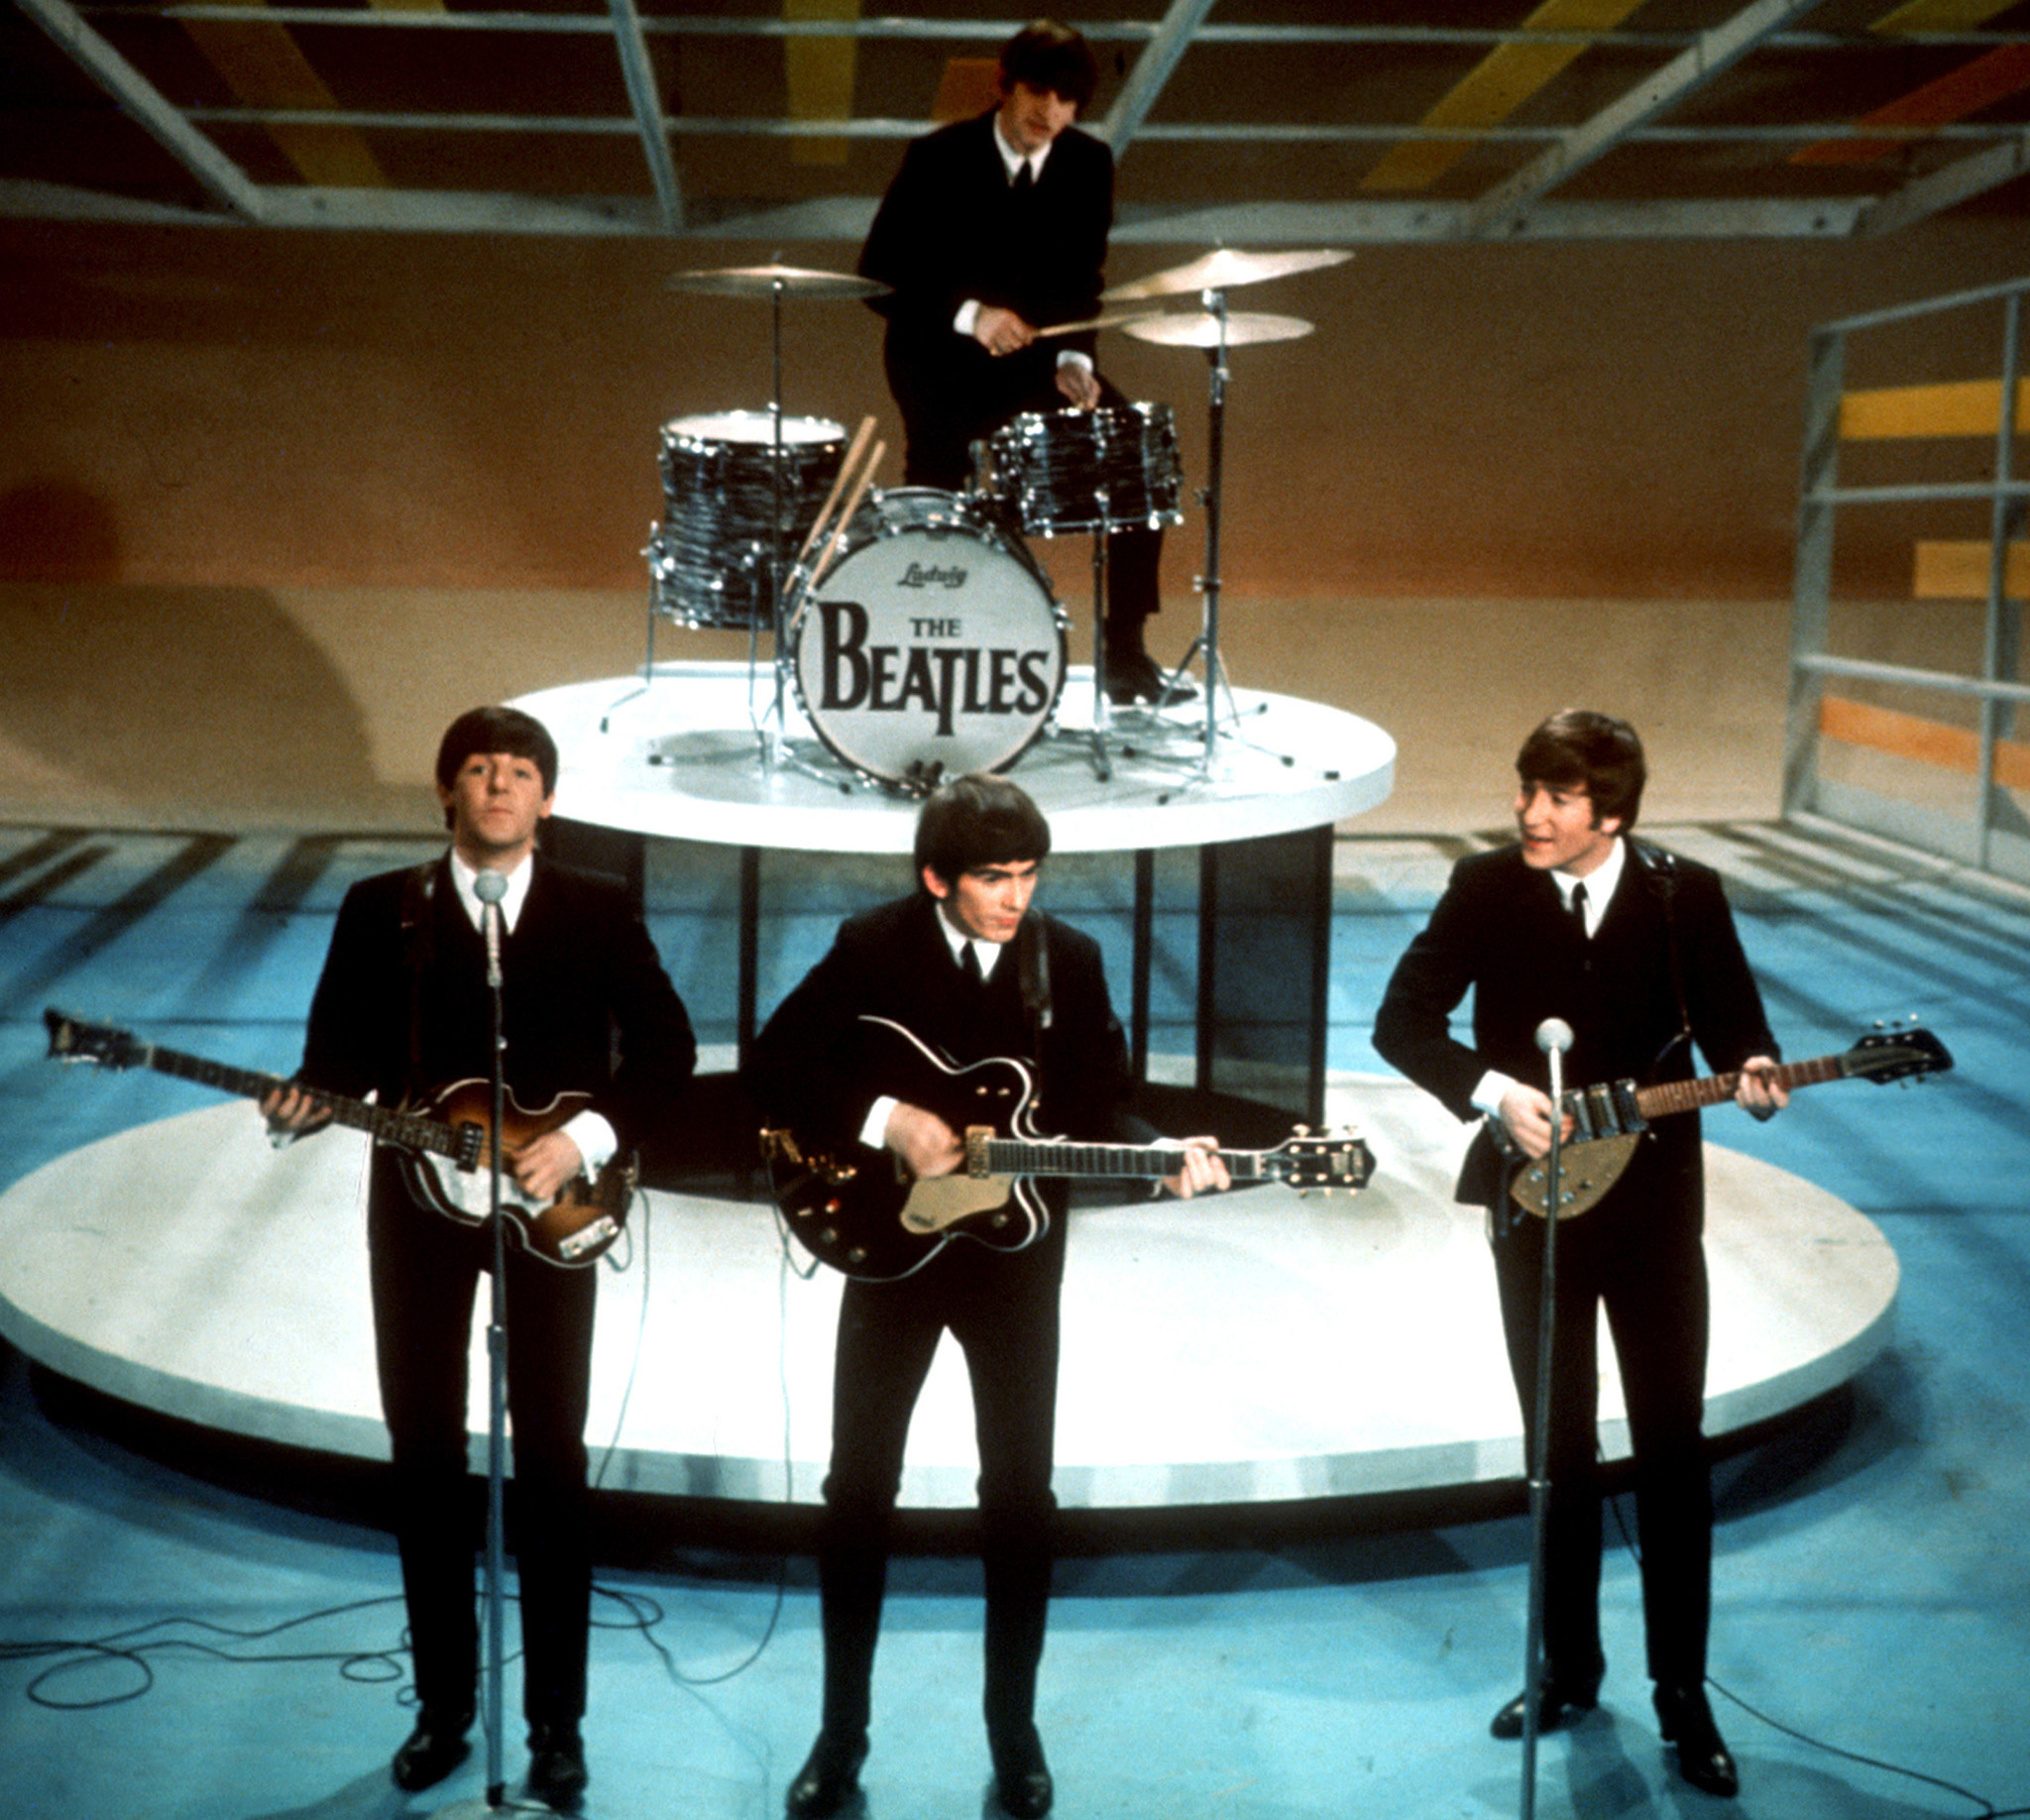 (l-r) Paul McCartney, George Harrison, John Lennon and Ringo Starr (on drums) of The Beatles perform on 